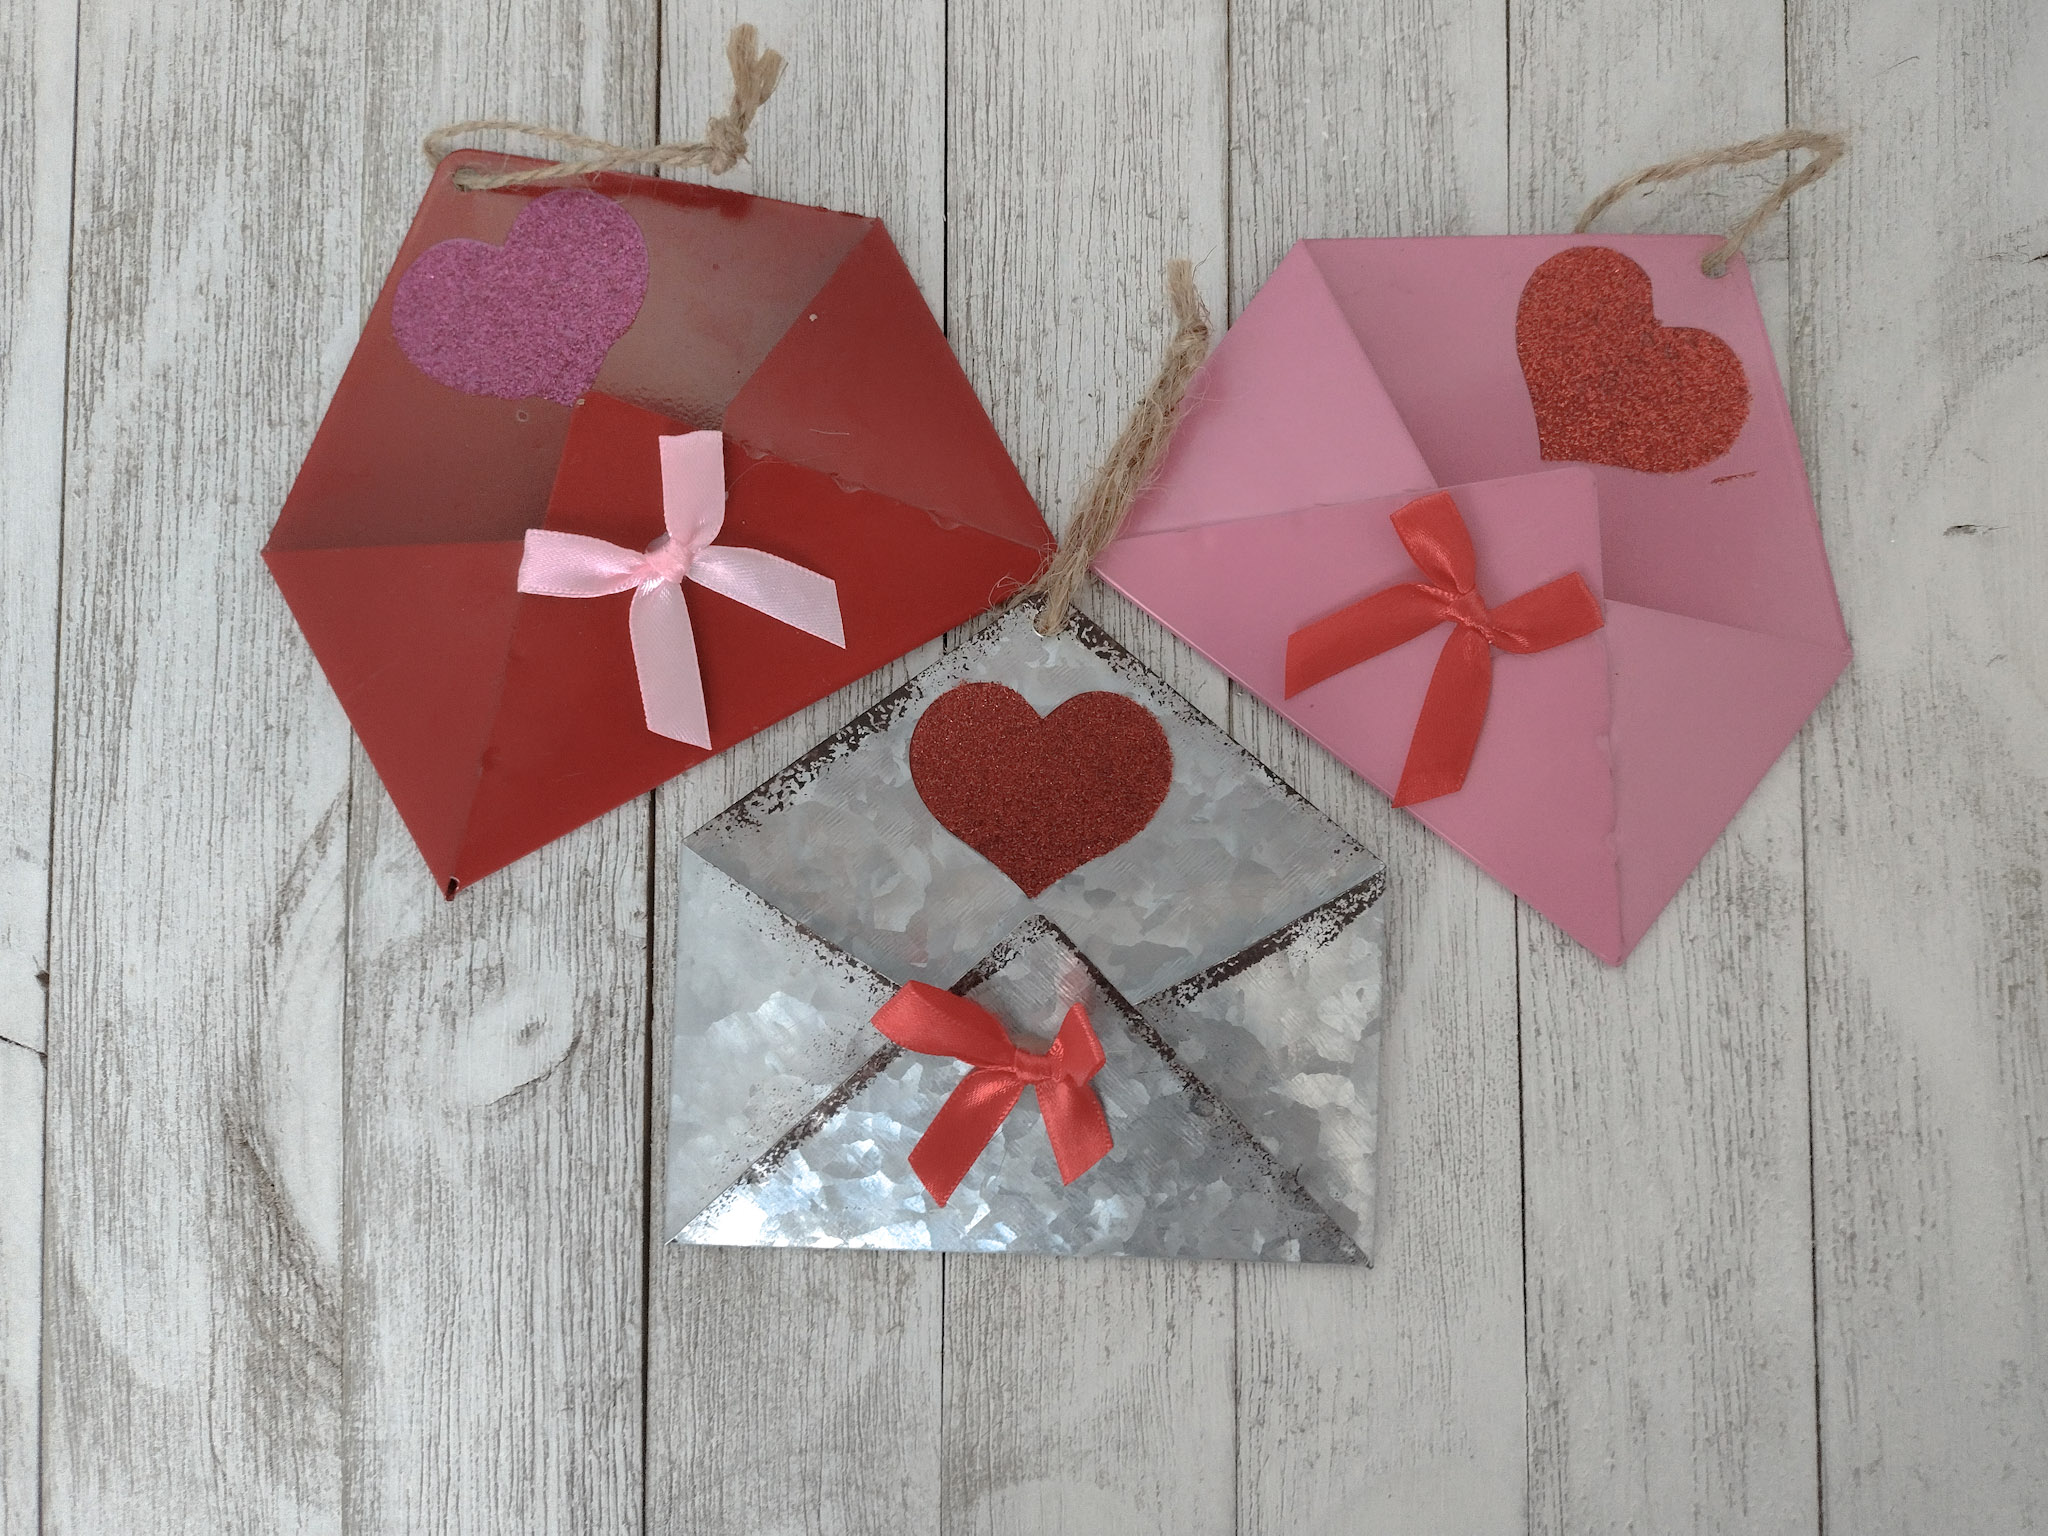 Three metal envelopes in clors of pink, red, and silver